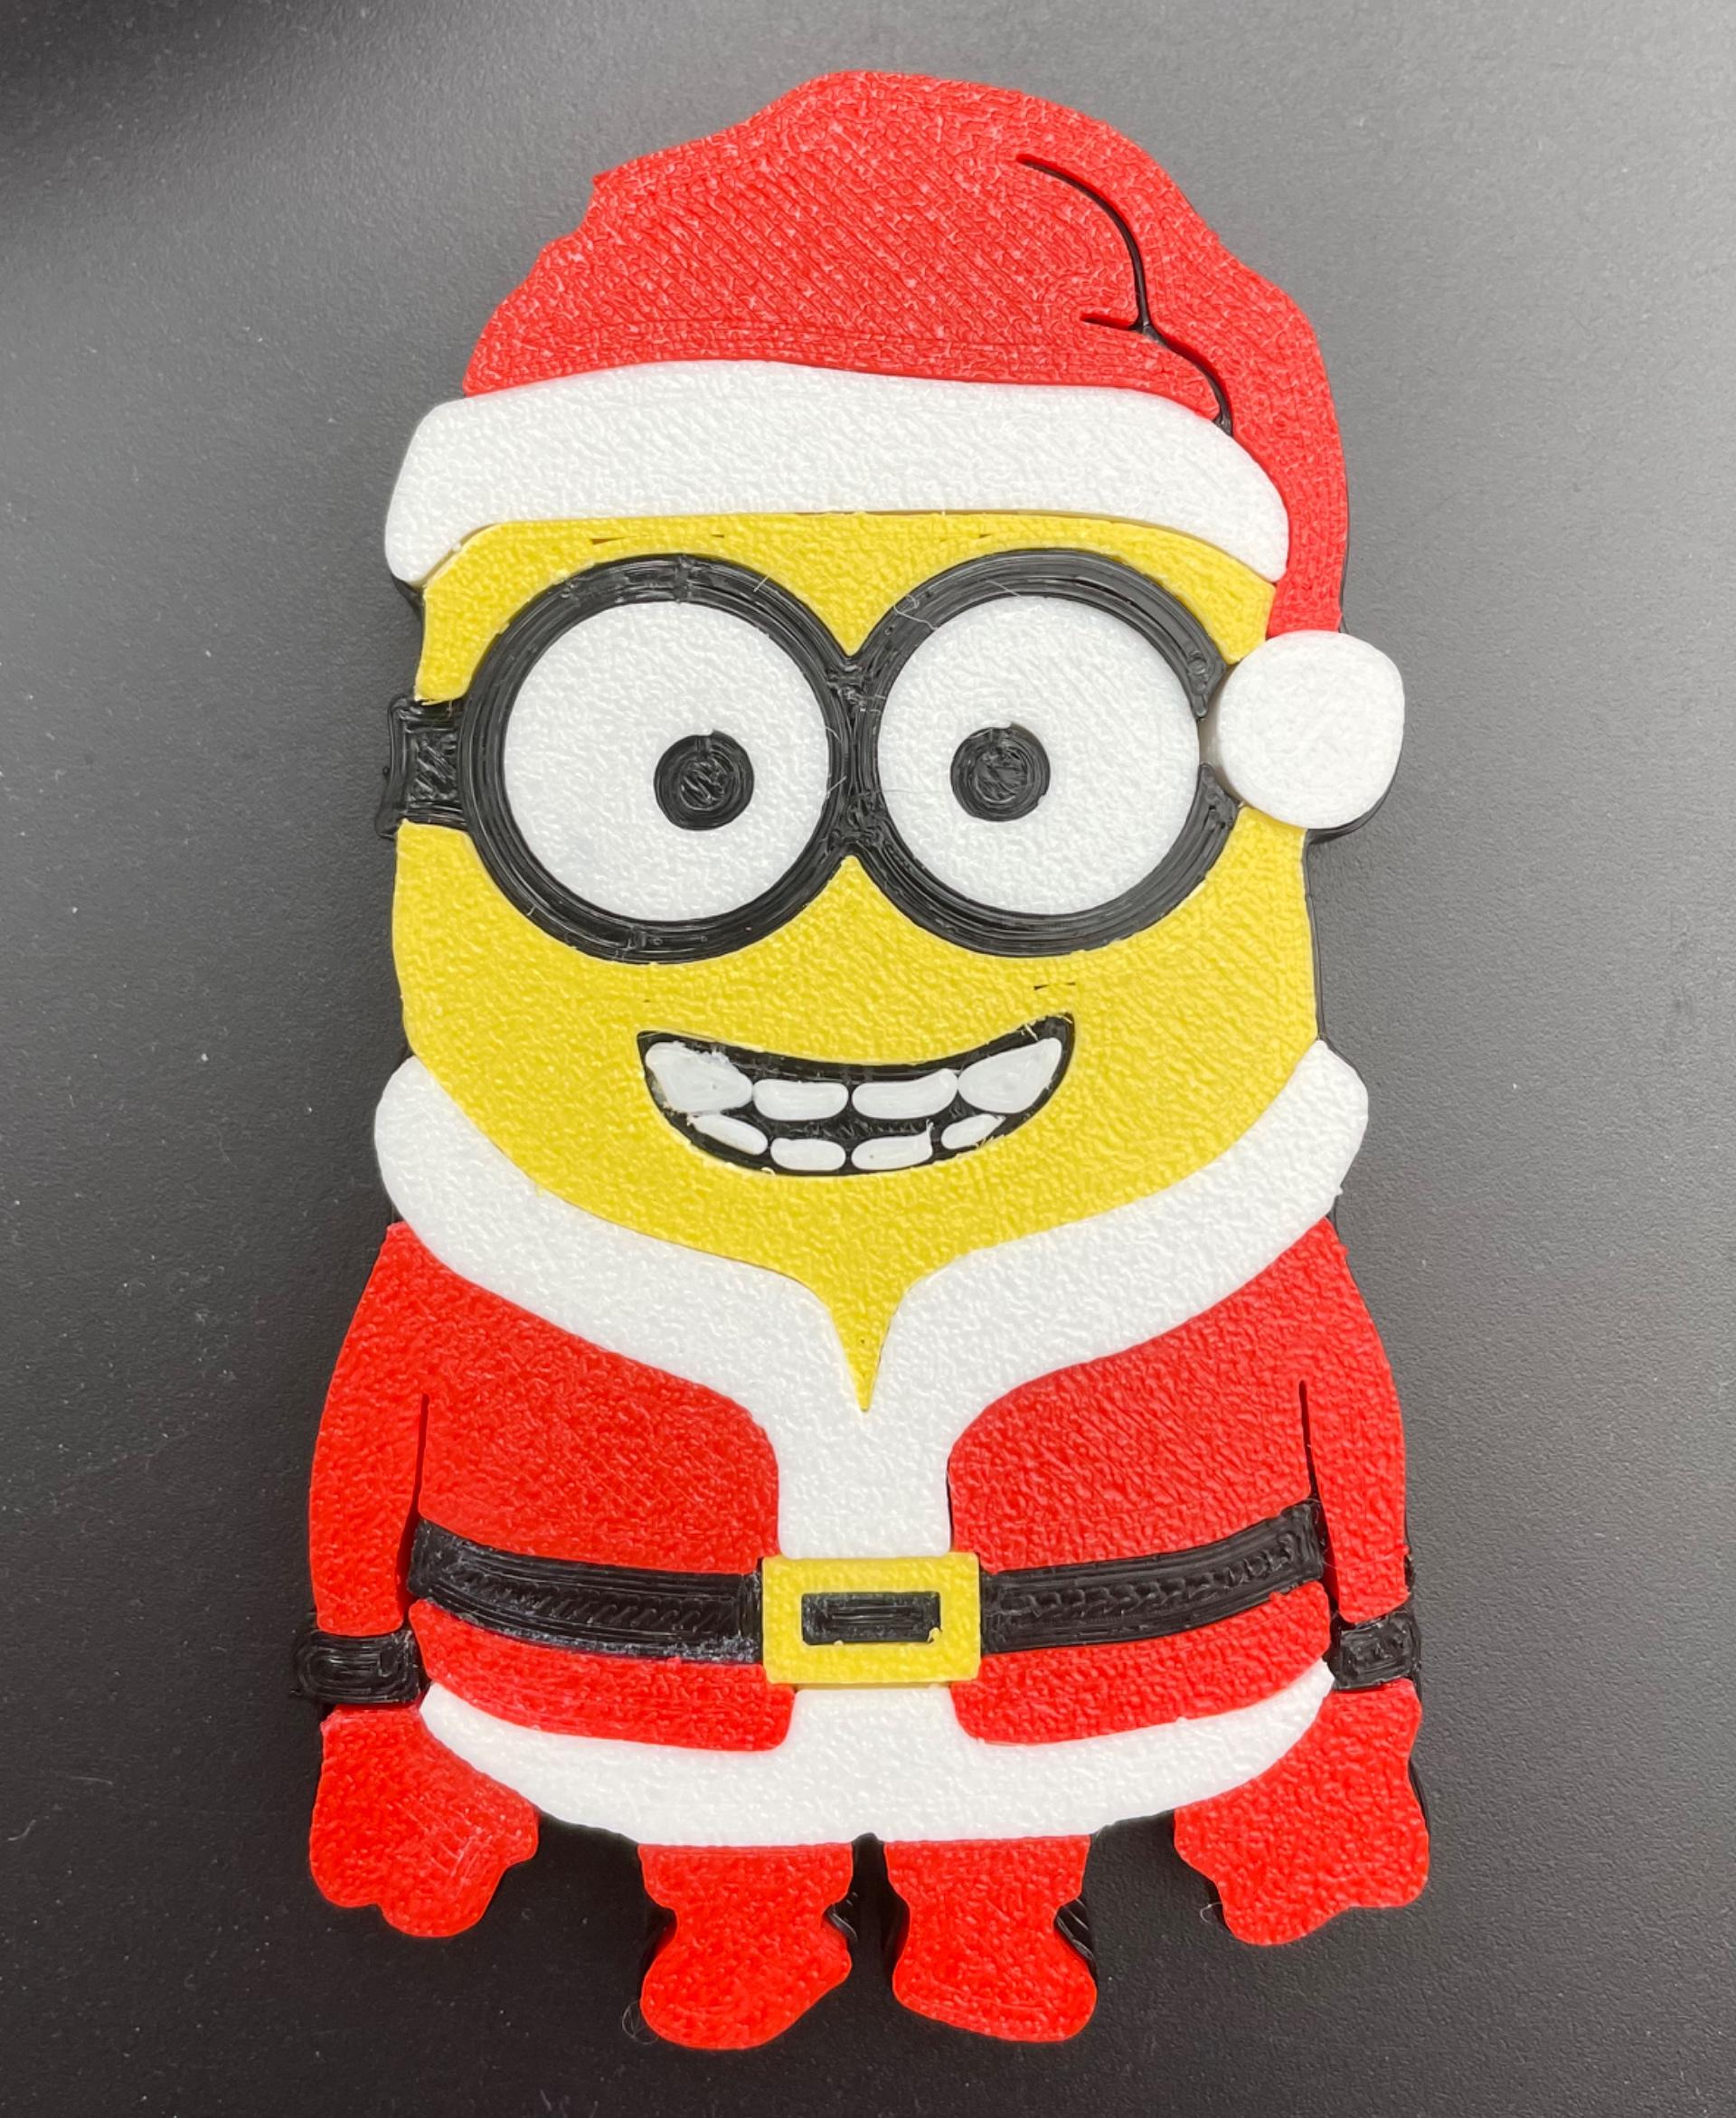 CHRISTMAS MINION - The model printed great! I scaled this model down to 75% in my slicer and is still fit together quite nicely. I definitely recommend this printing out this awesome model for the Holiday season! - 3d model